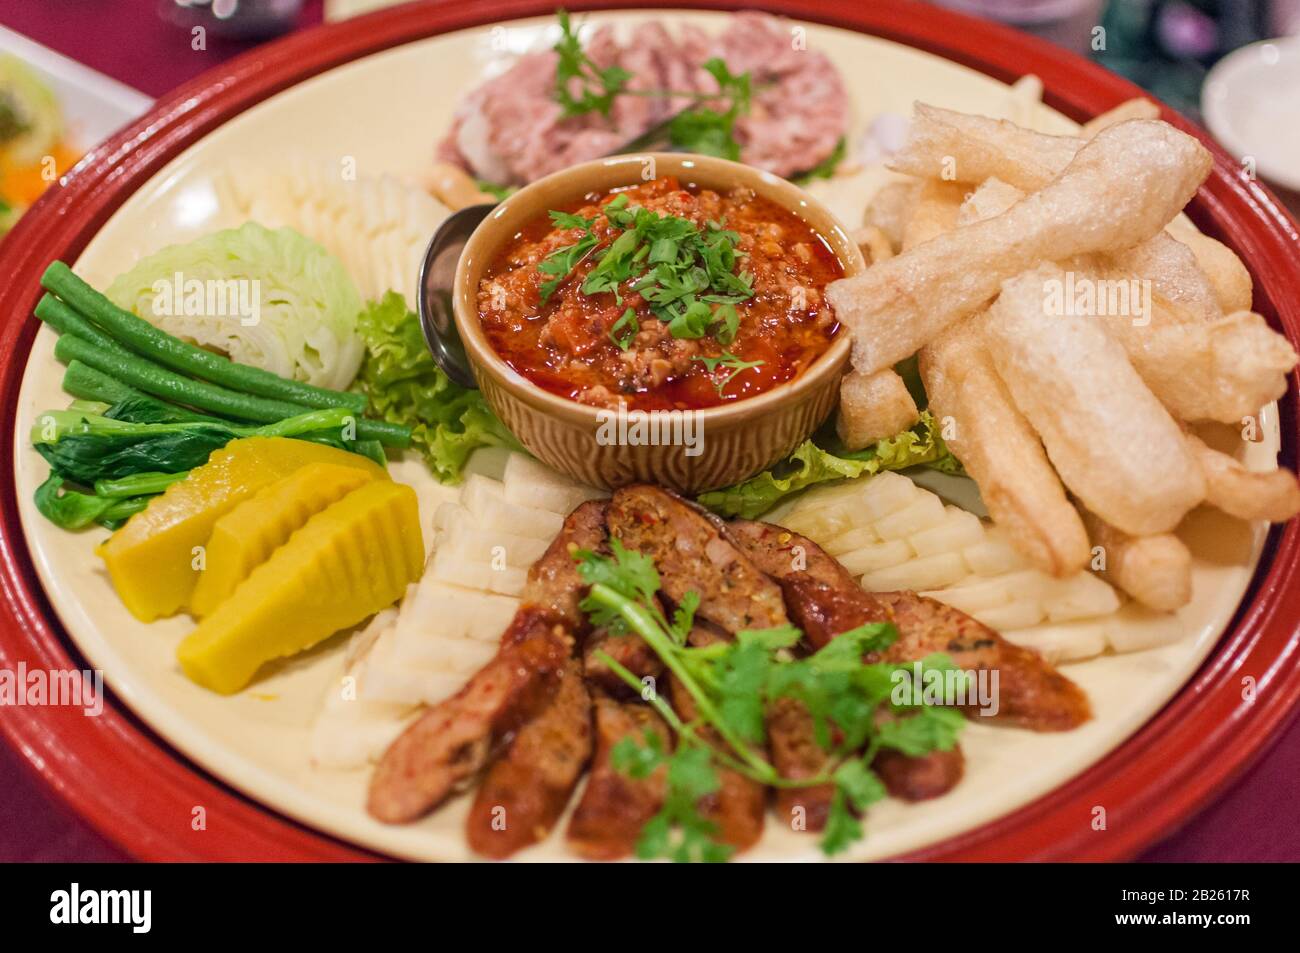 plate with the traditional Northern Thai food dish Nam Prik, steamed Vegetables and Sai Oua sausage in Chiang Mai Stock Photo